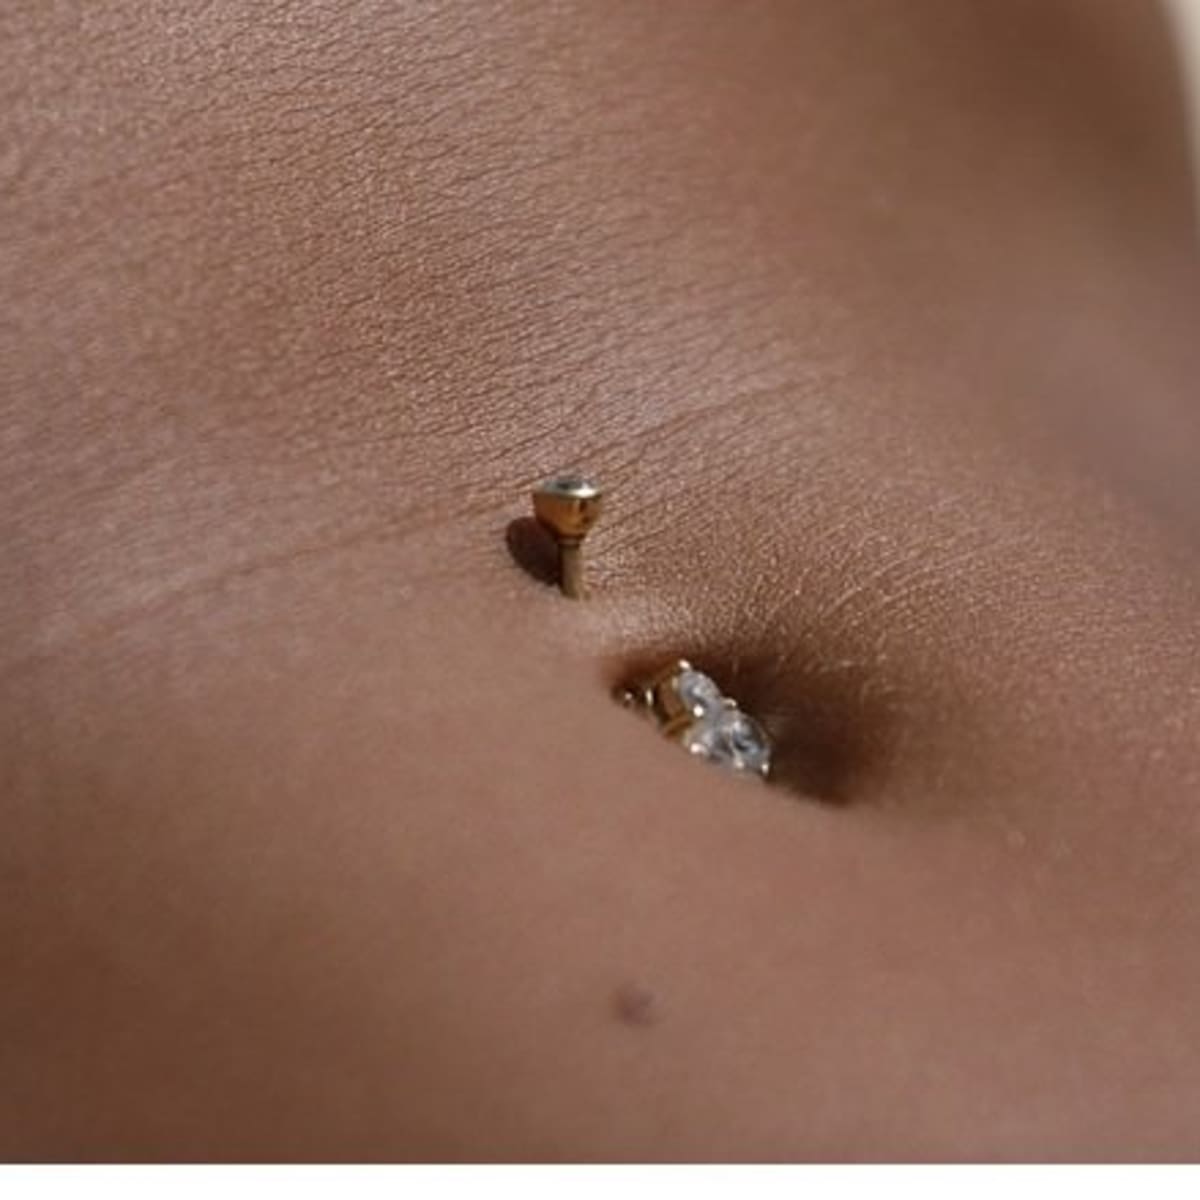 My Prolonged Belly Button Piercing Nightmare picture